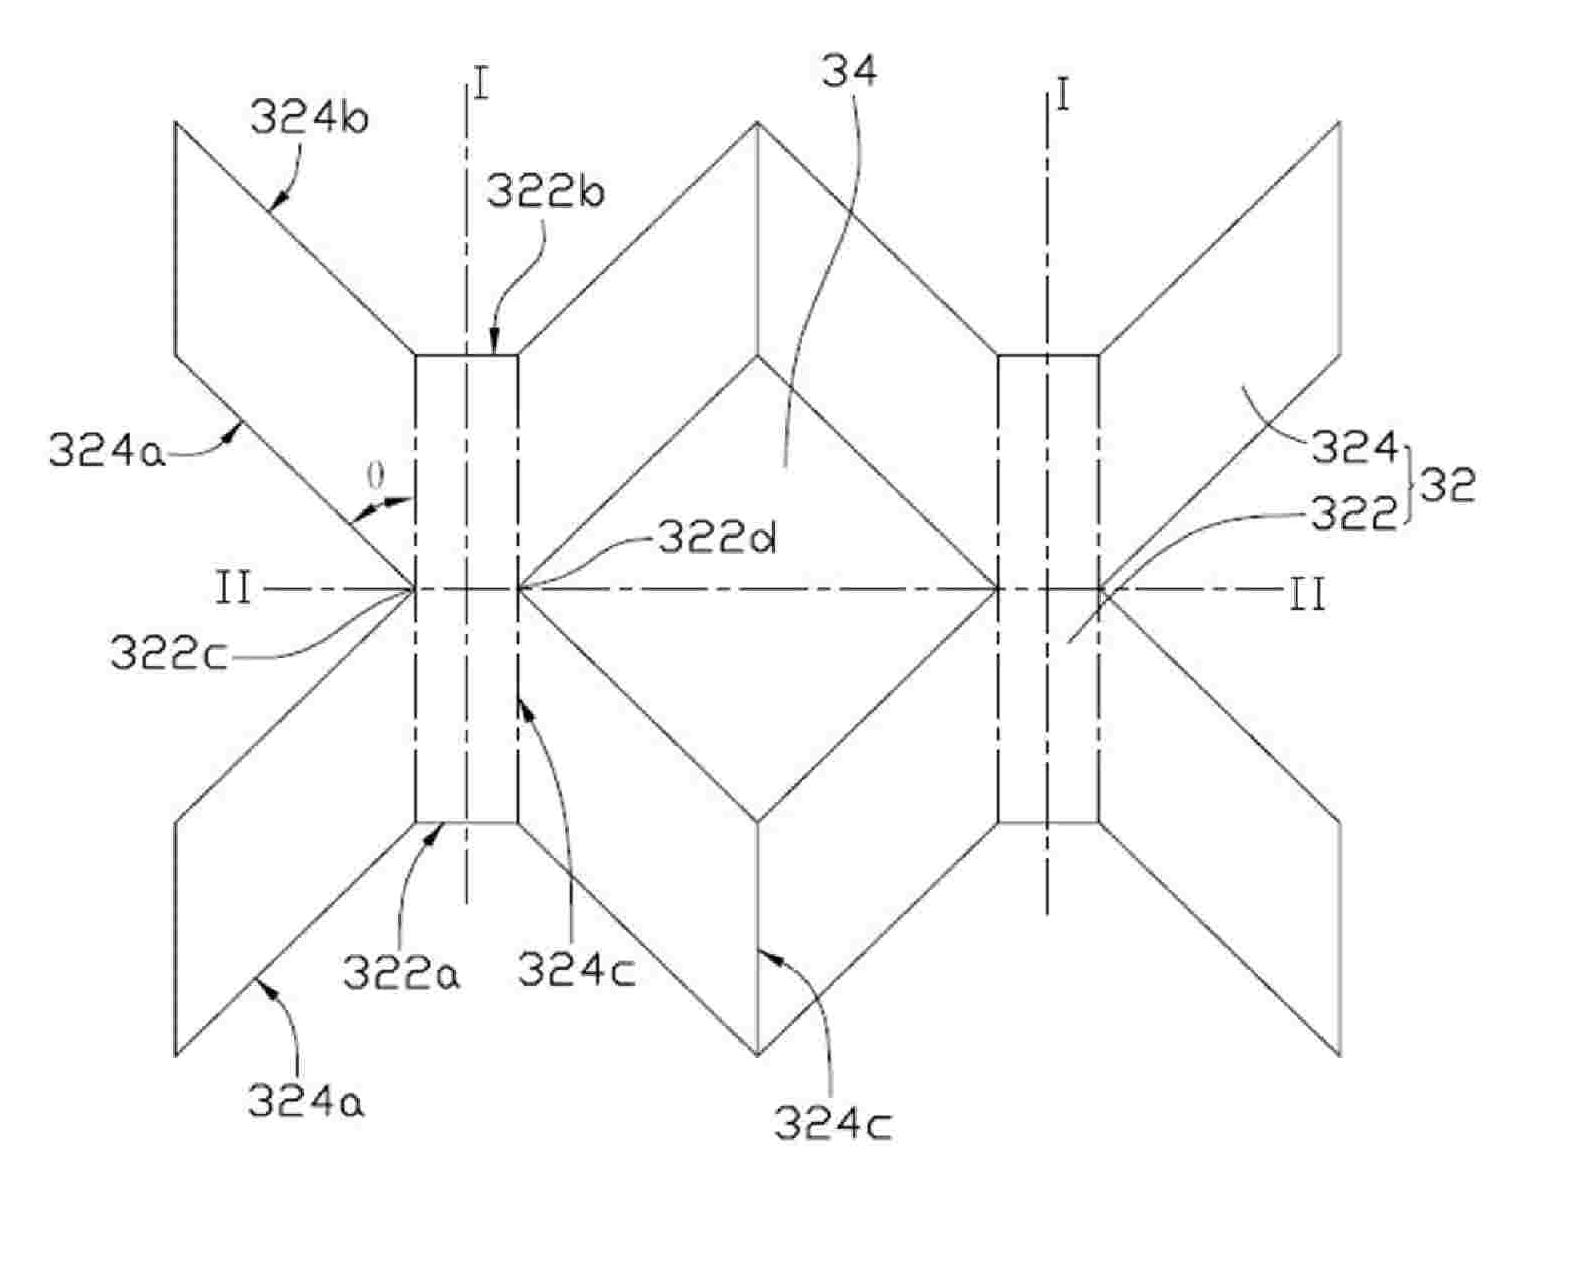 Display screen structure